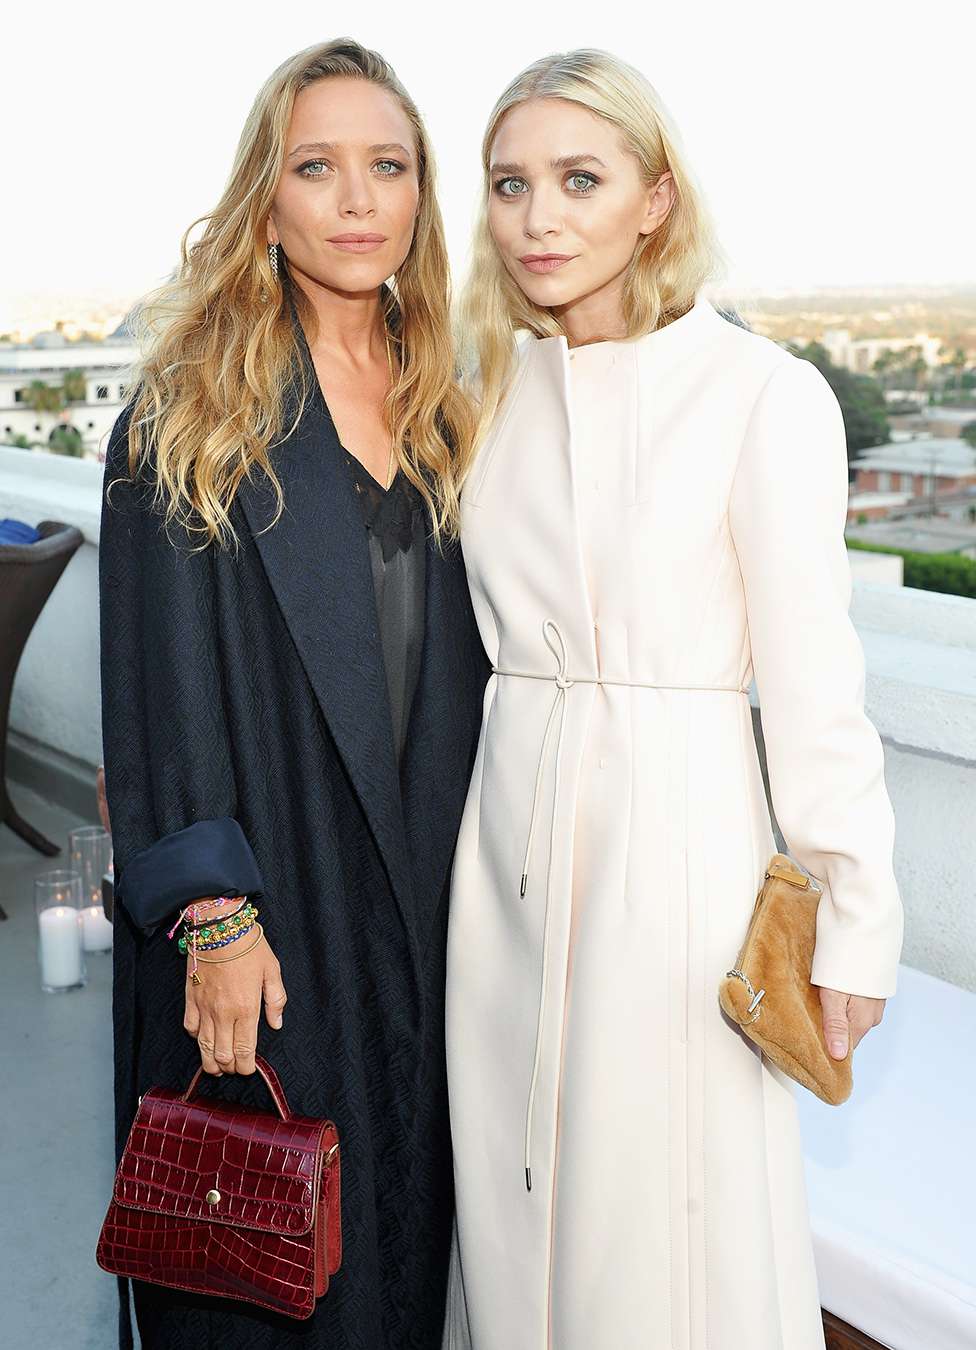 Olsen Twins x InStyle Party - Lead